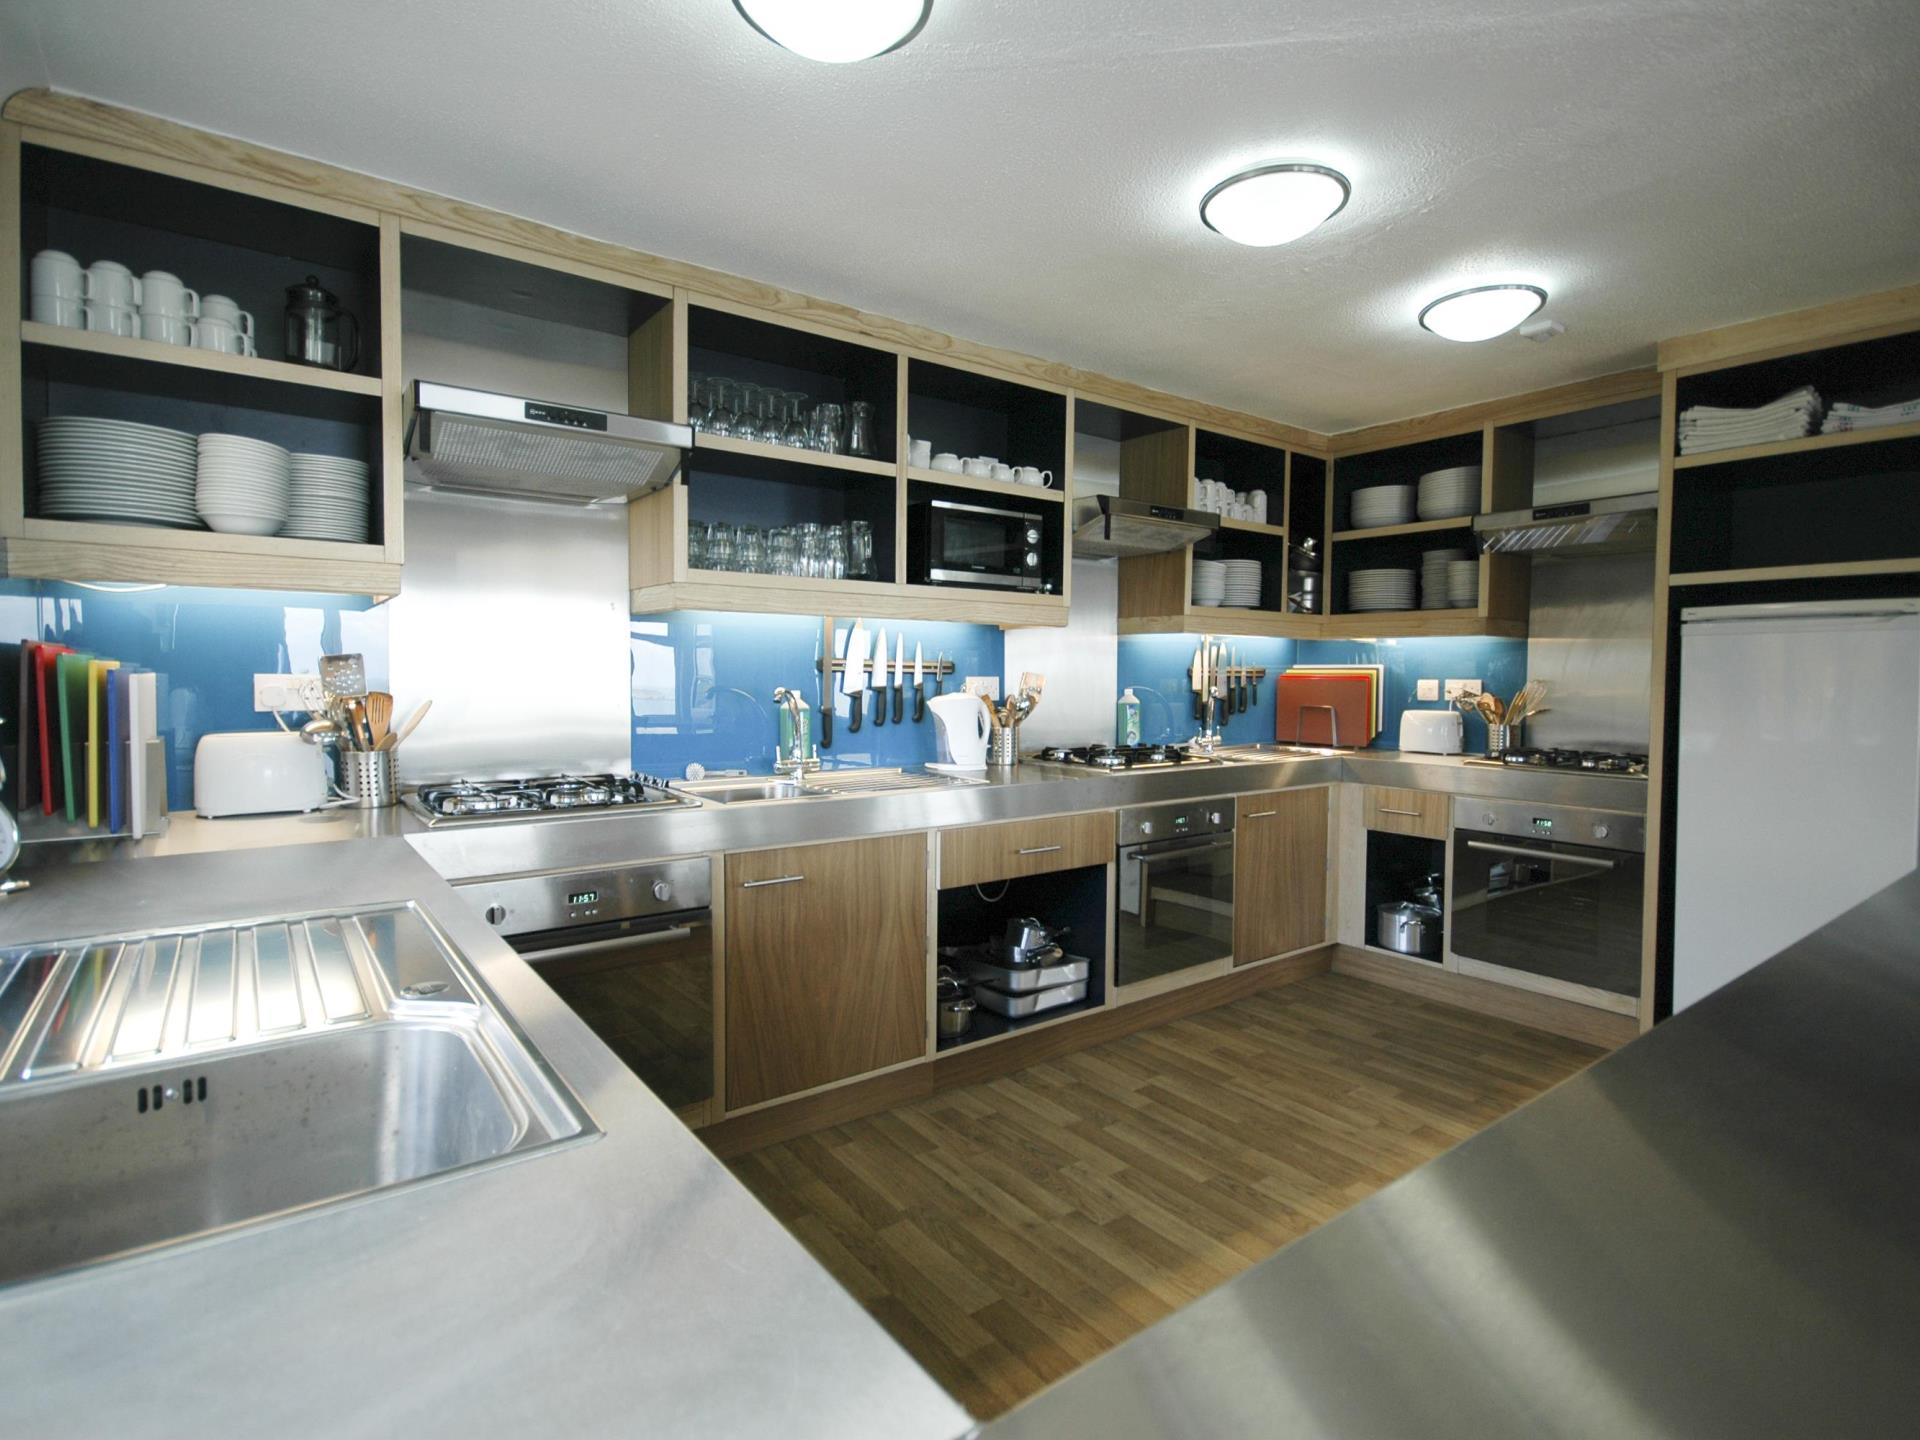 Self-Catering Kitchen